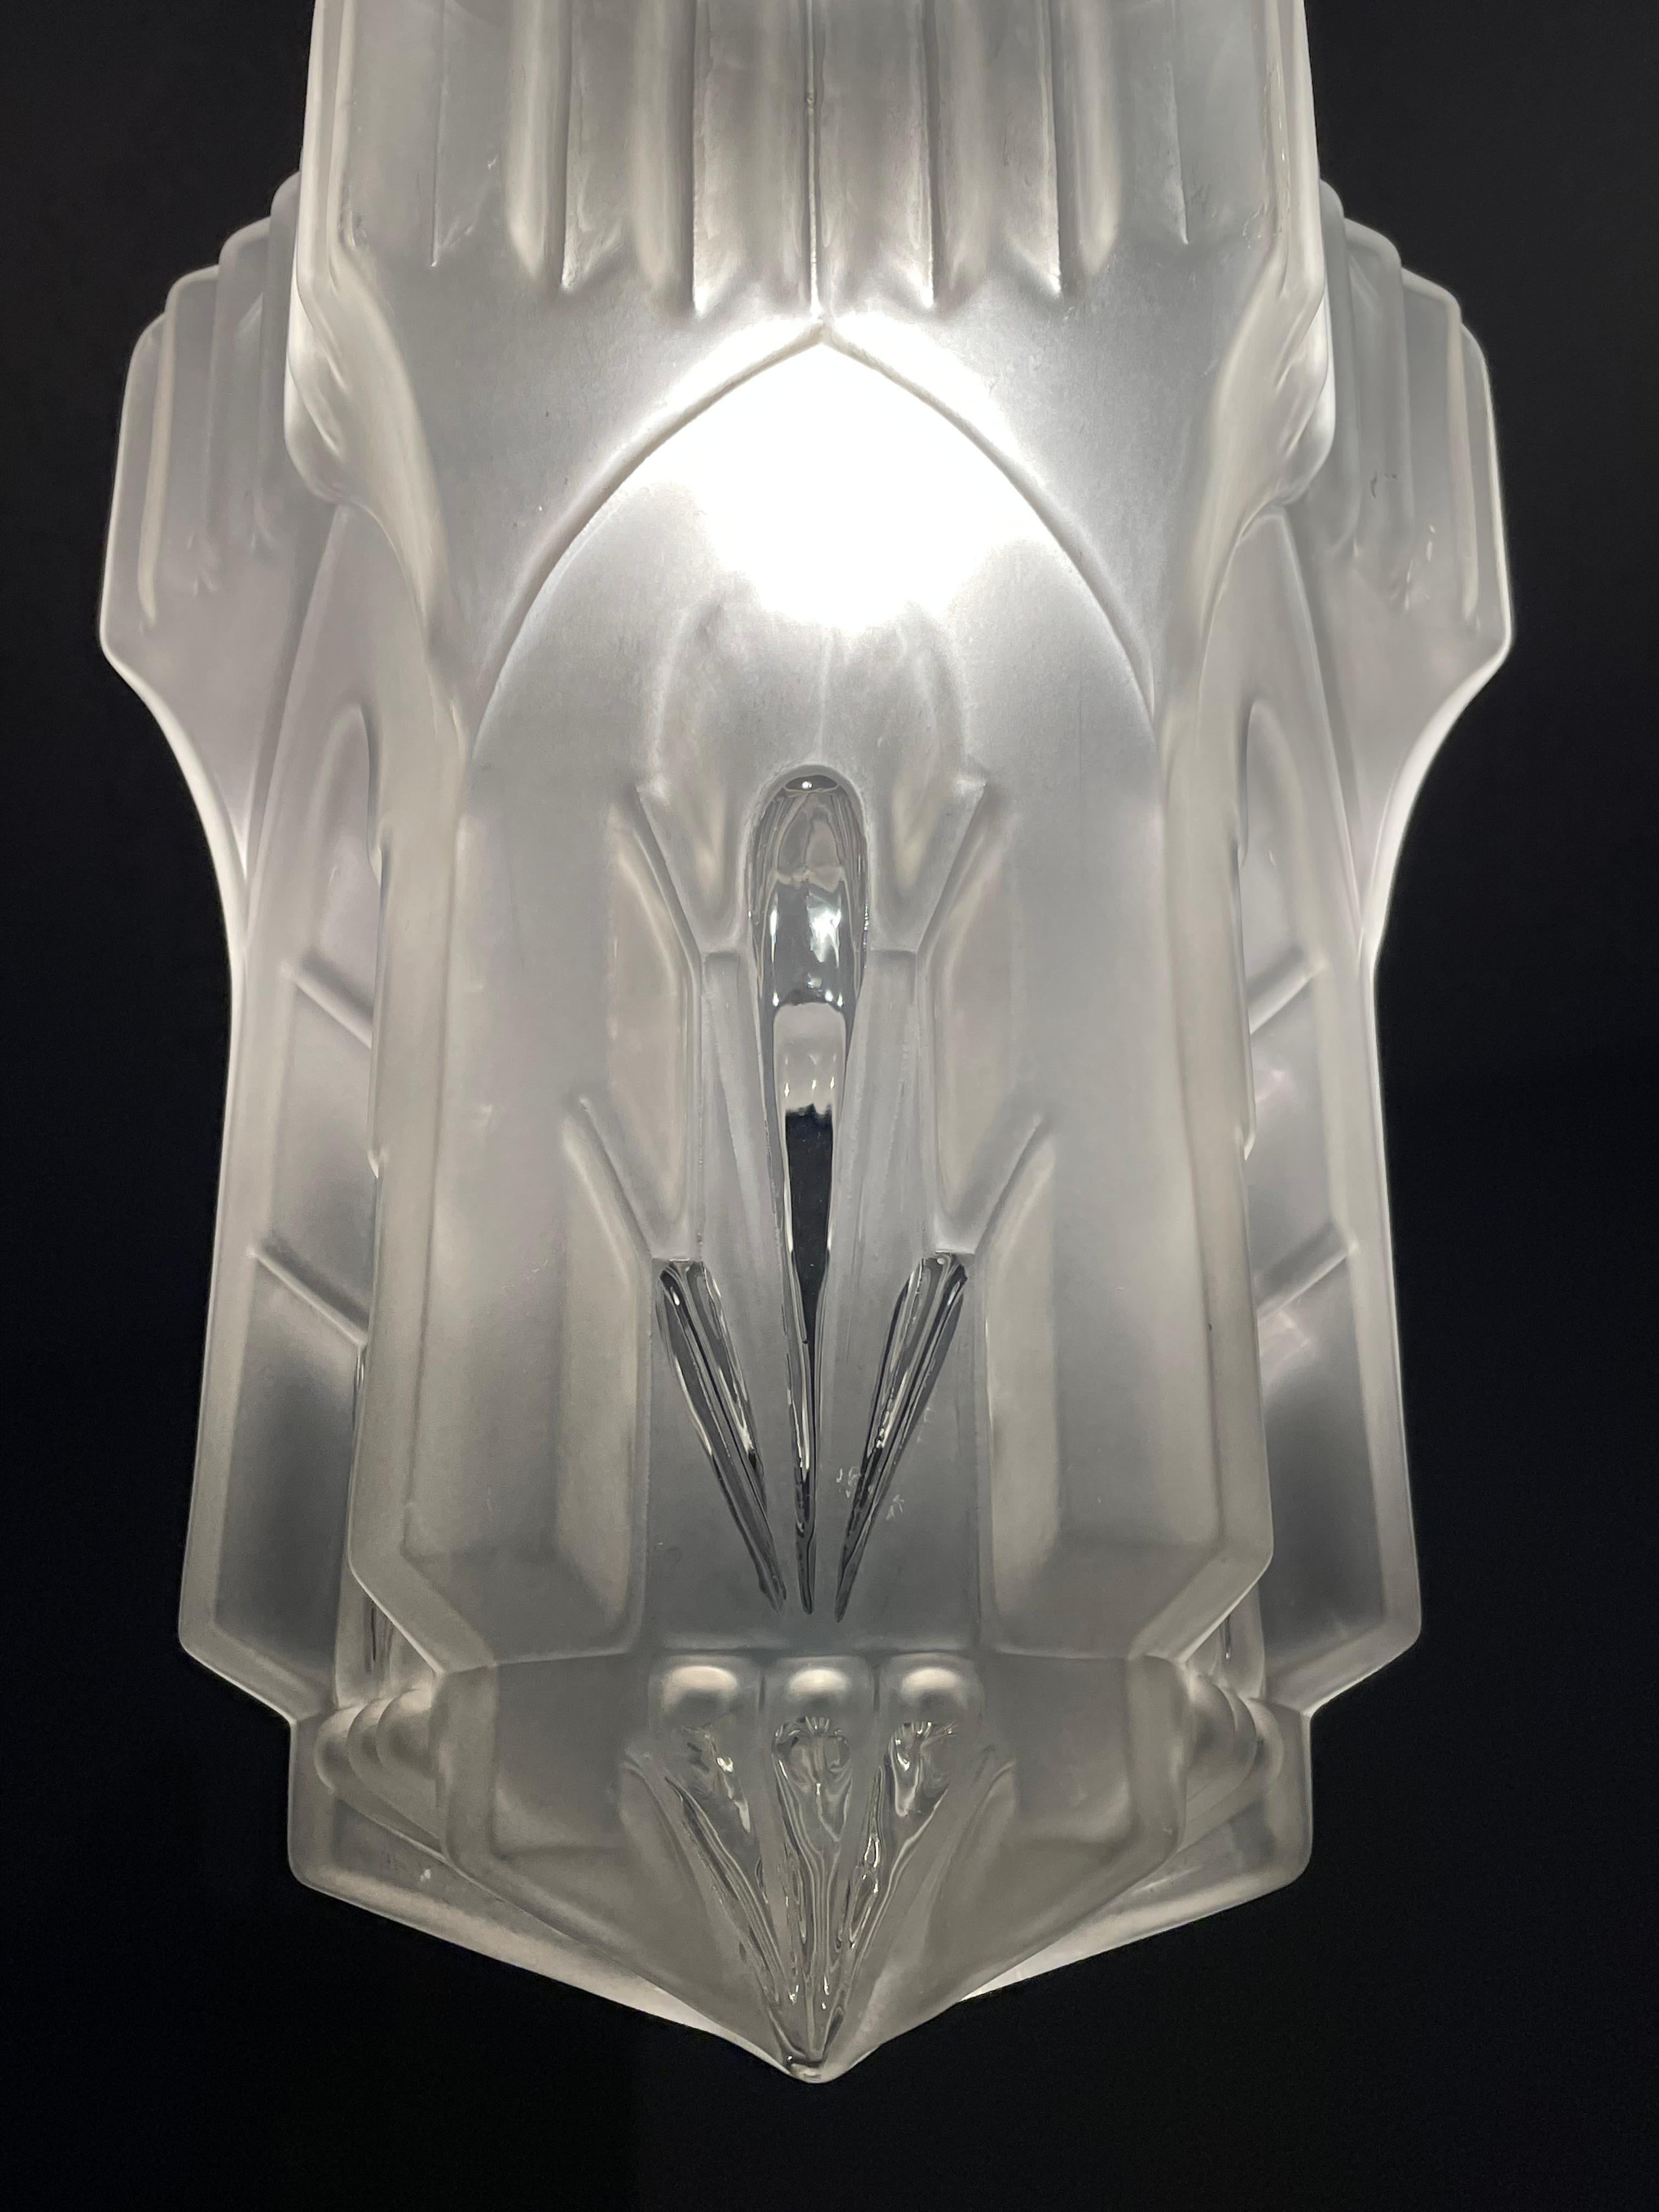 Excellent condition and marvelous design, glass-art pendant.

This incredibly stylish, french-made pendant is in excellent condition and it is an absolute joy to look at, both on and off. Its good size and timeless geometrical Art Deco design